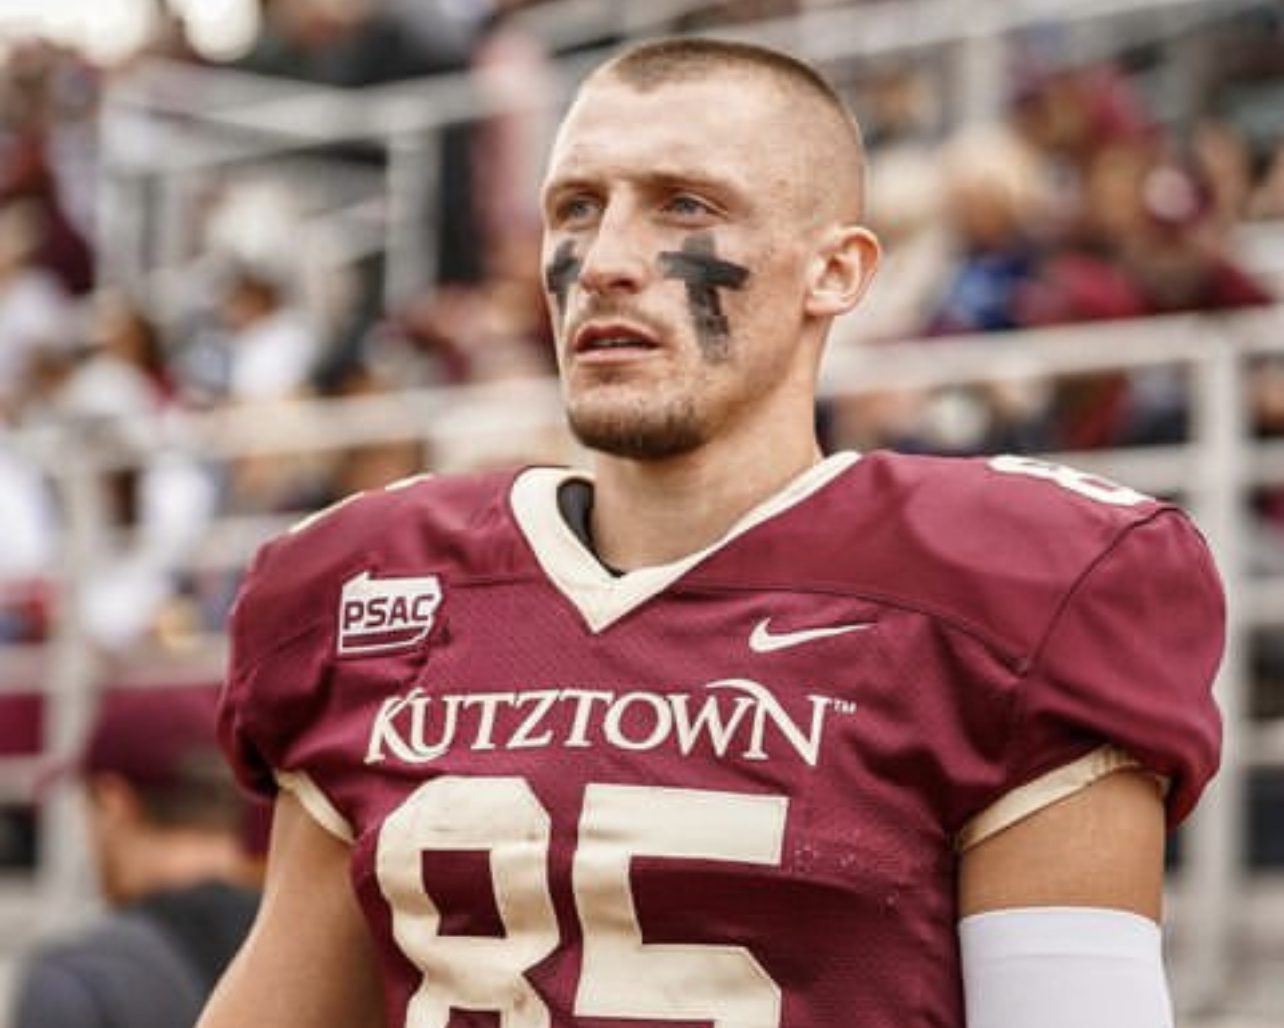 Jerome Kapp the standout wide receiver from Kutztown University recently sat down with NFL Draft Diamonds owner Damond Talbot.